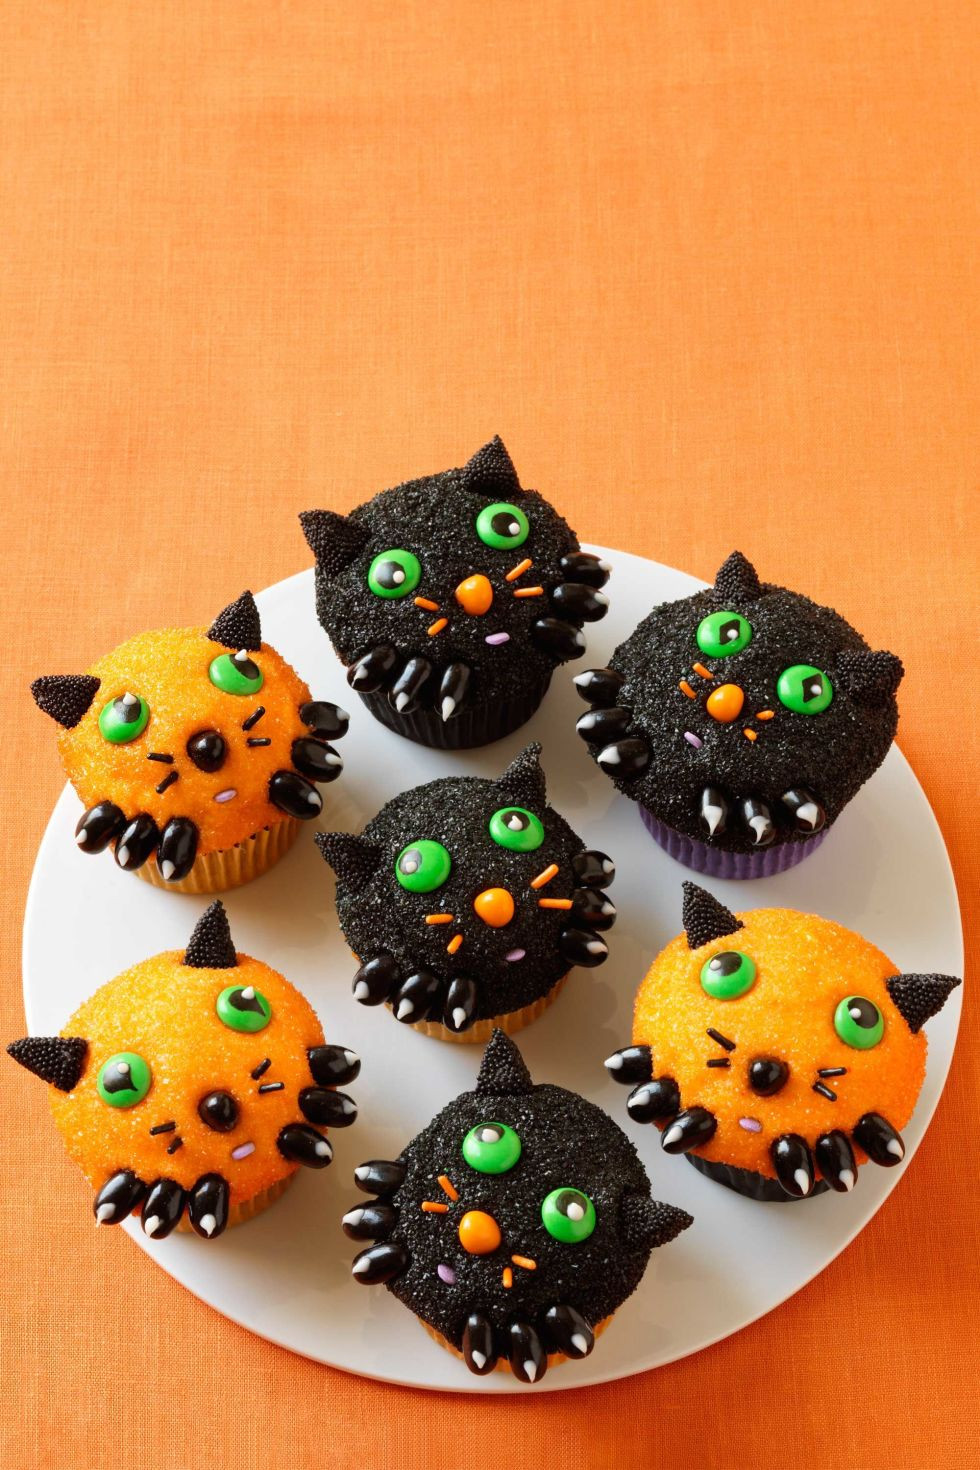 Halloween Cupcakes Images
 Top 15 Halloween cupcakes decorating ideas for You